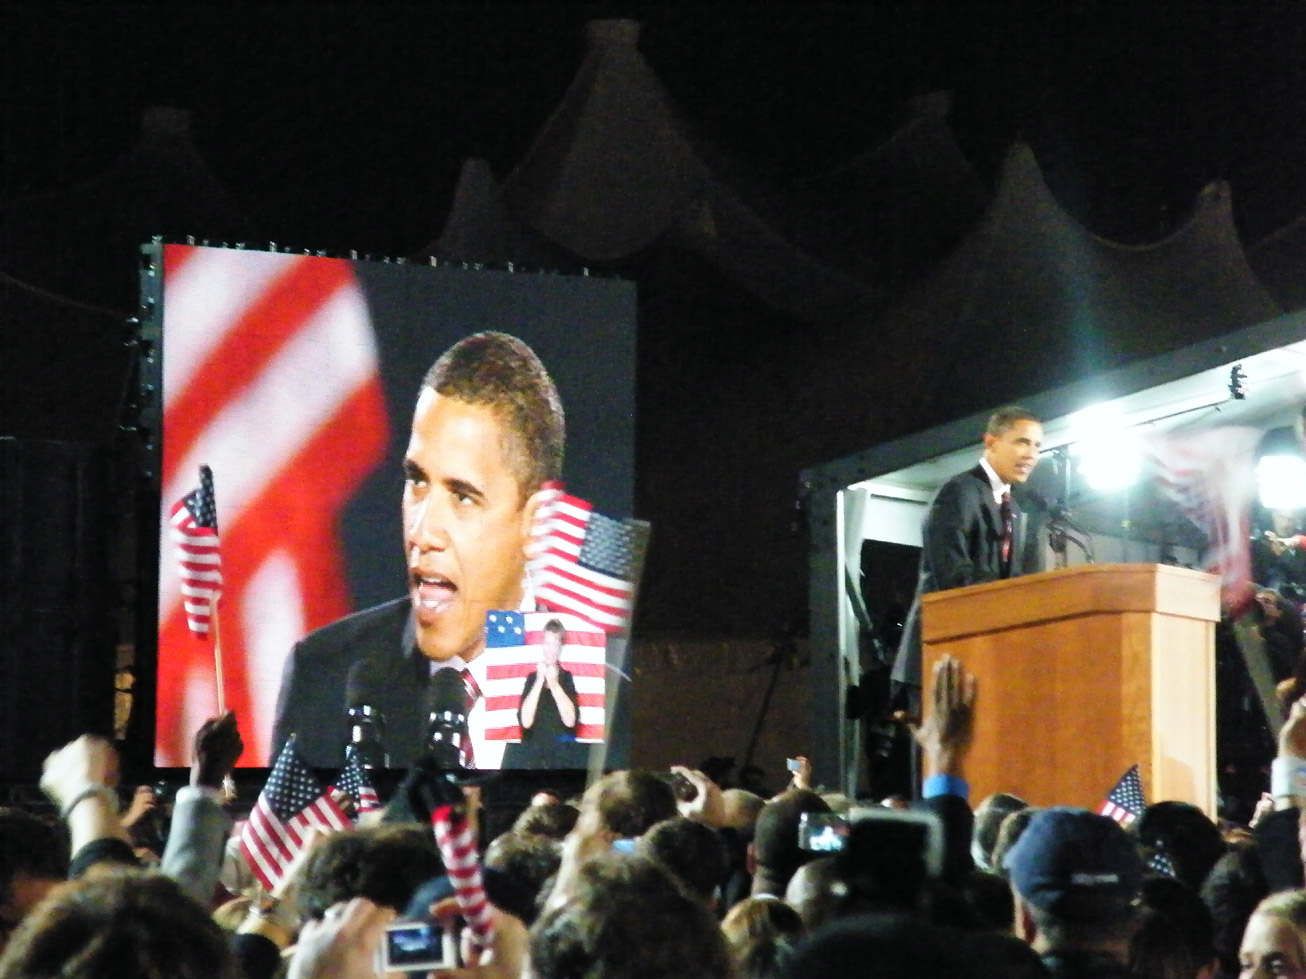 the president and republican barack obama speaking in front of people